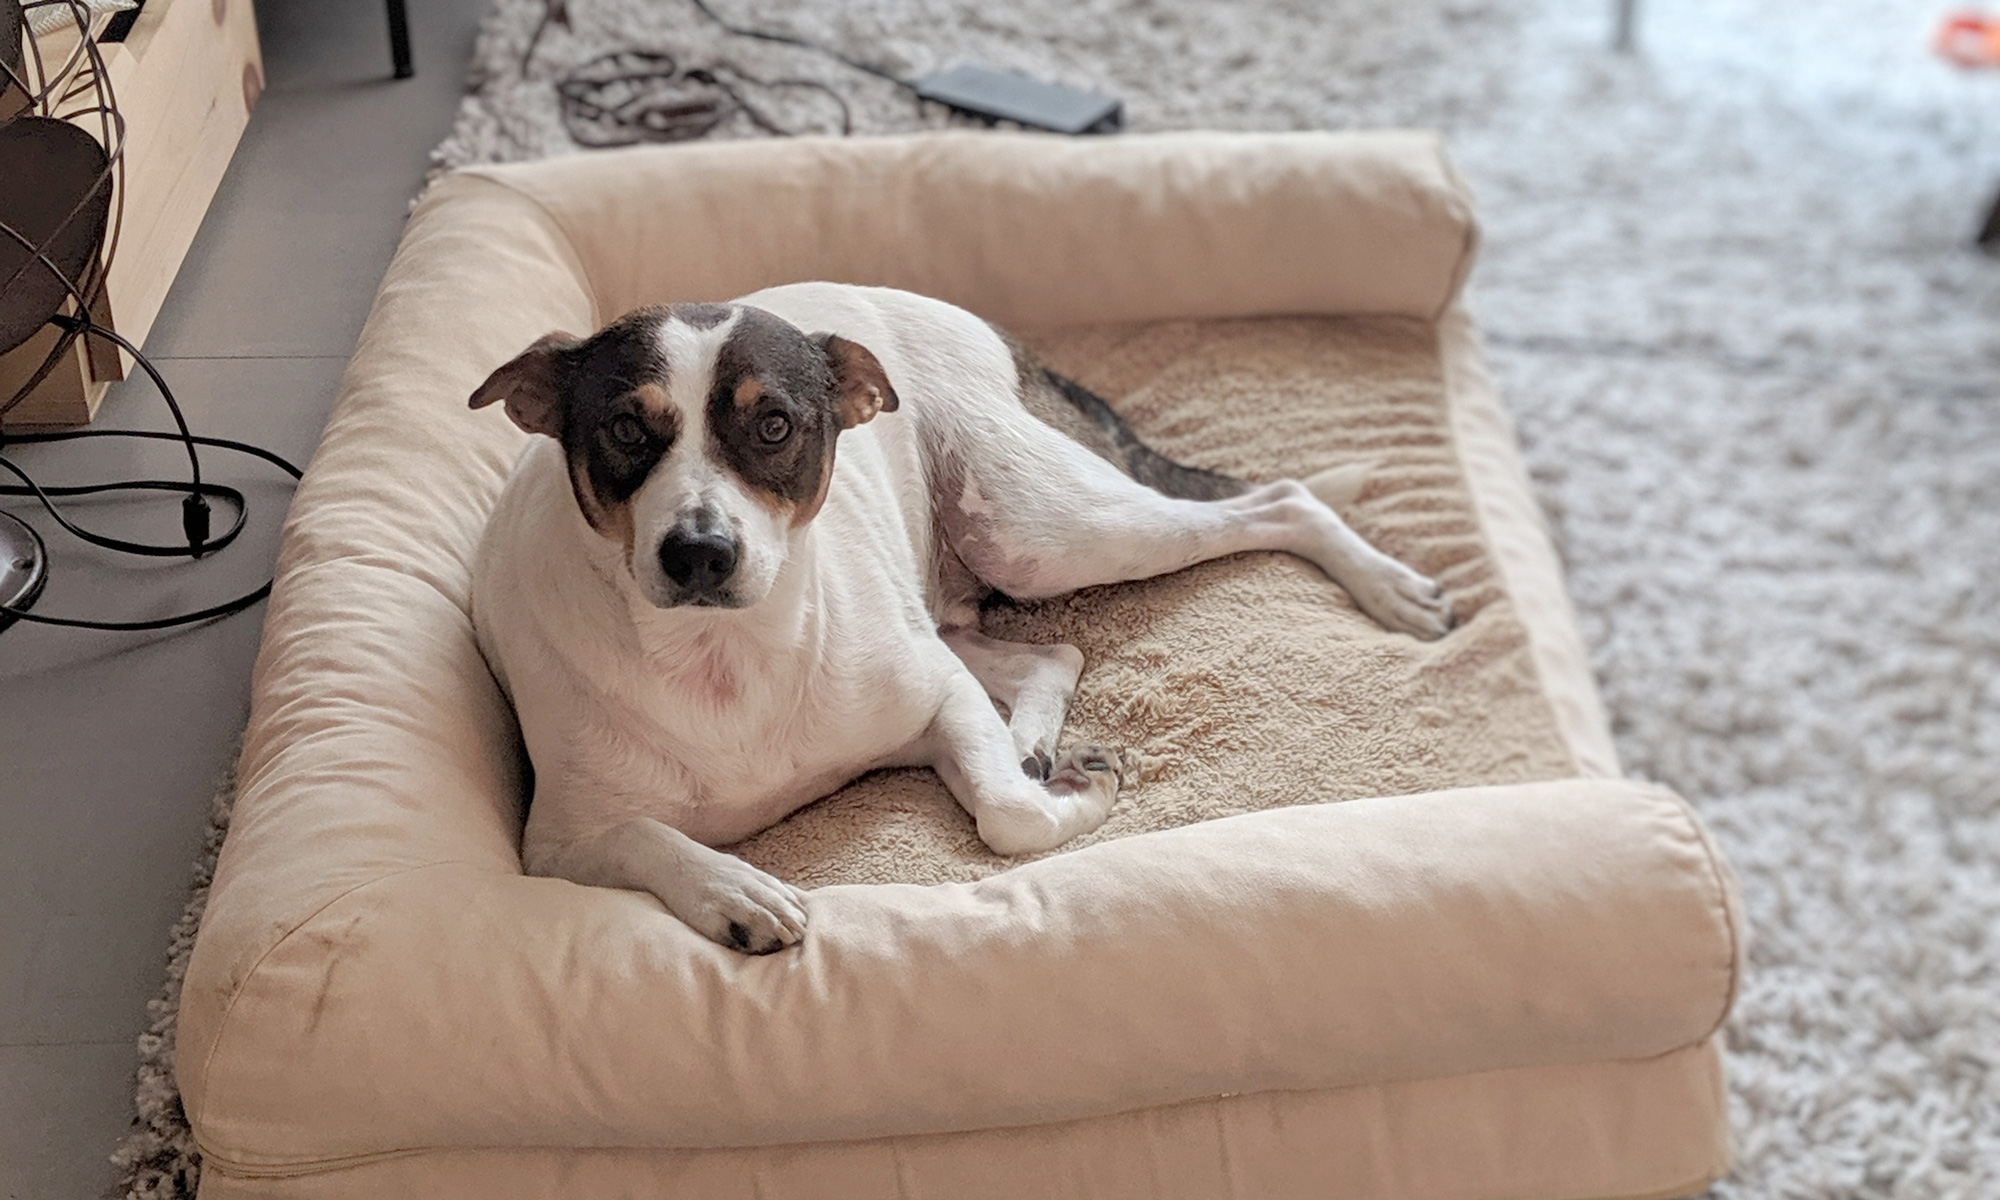 Nelson, the rat terrier mix looking dog, lounging on his luxurious memory foam mattress in the daylight.